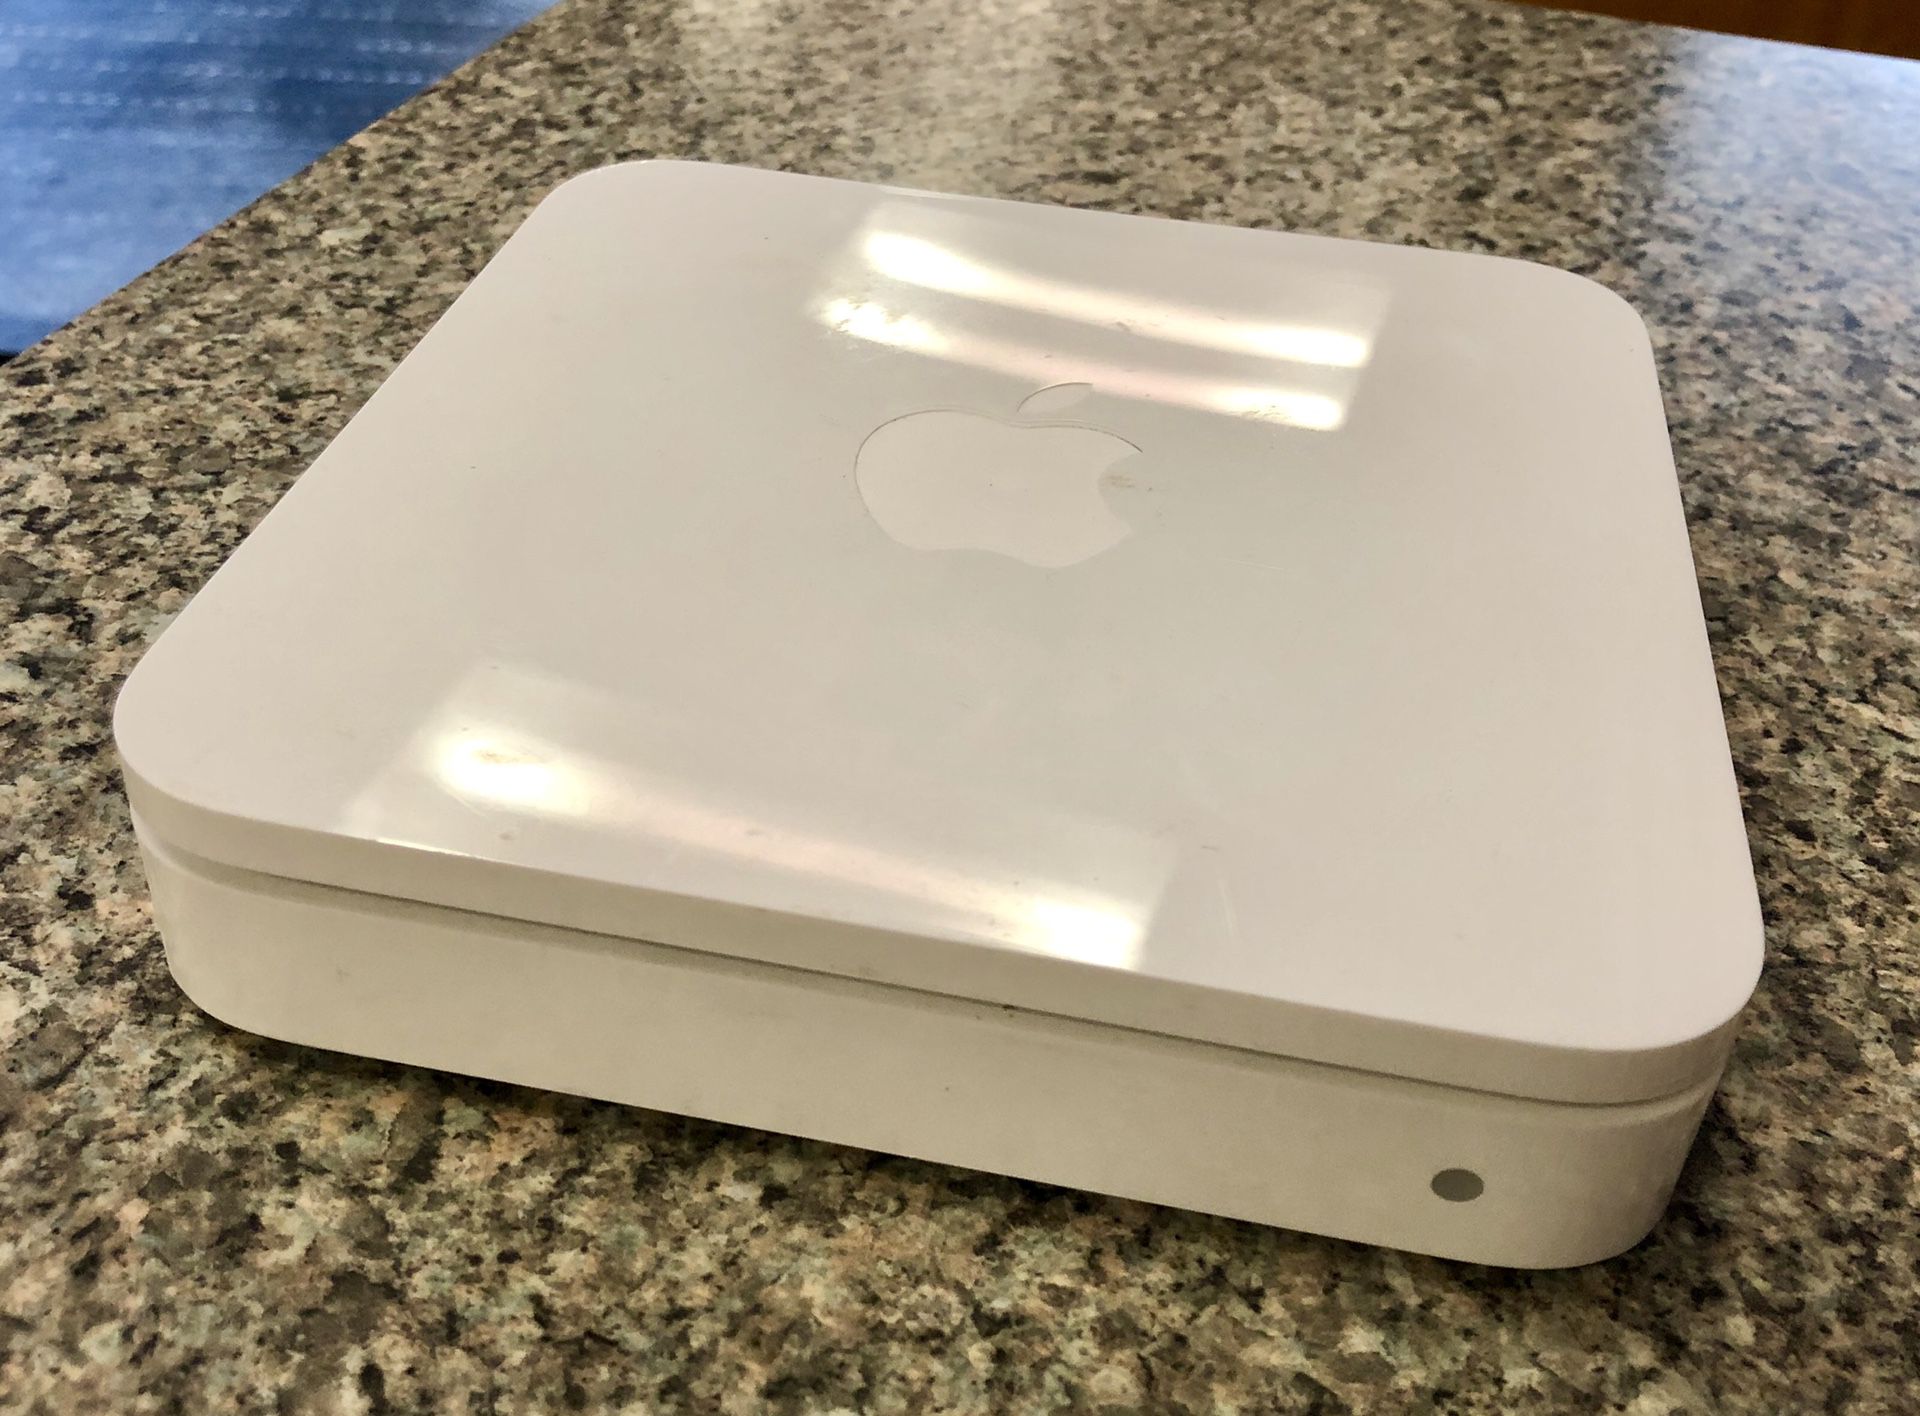 Apple Extreme Base Station 802.11n 5th Generation A1408 Dual Band for Sale in Norfolk, VA - OfferUp